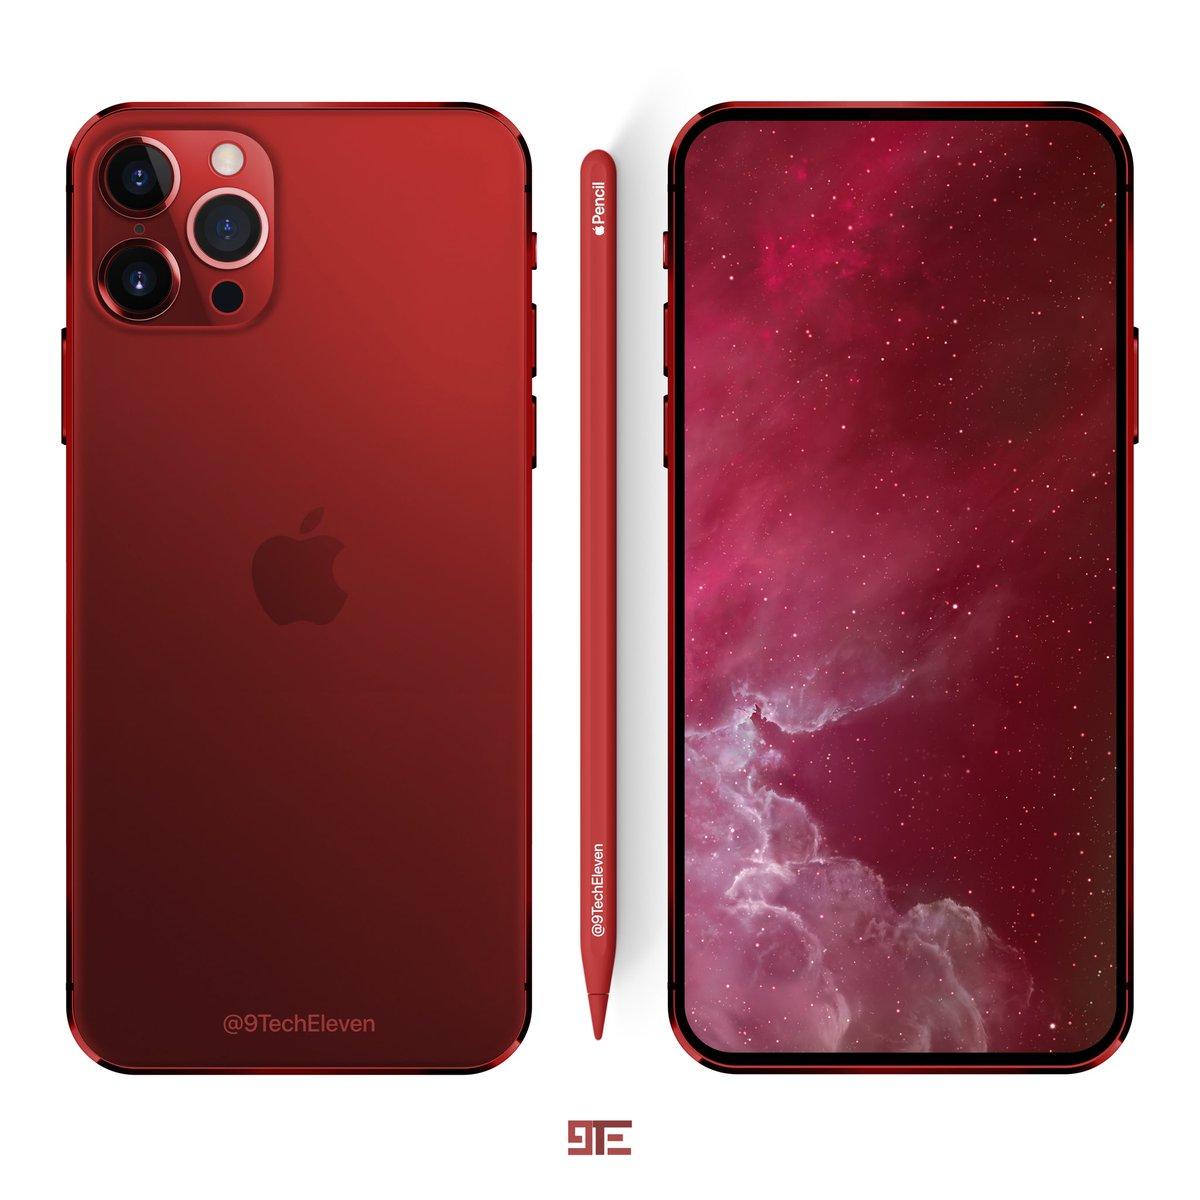 9TechEleven 2020 Red Concept iPhone 5